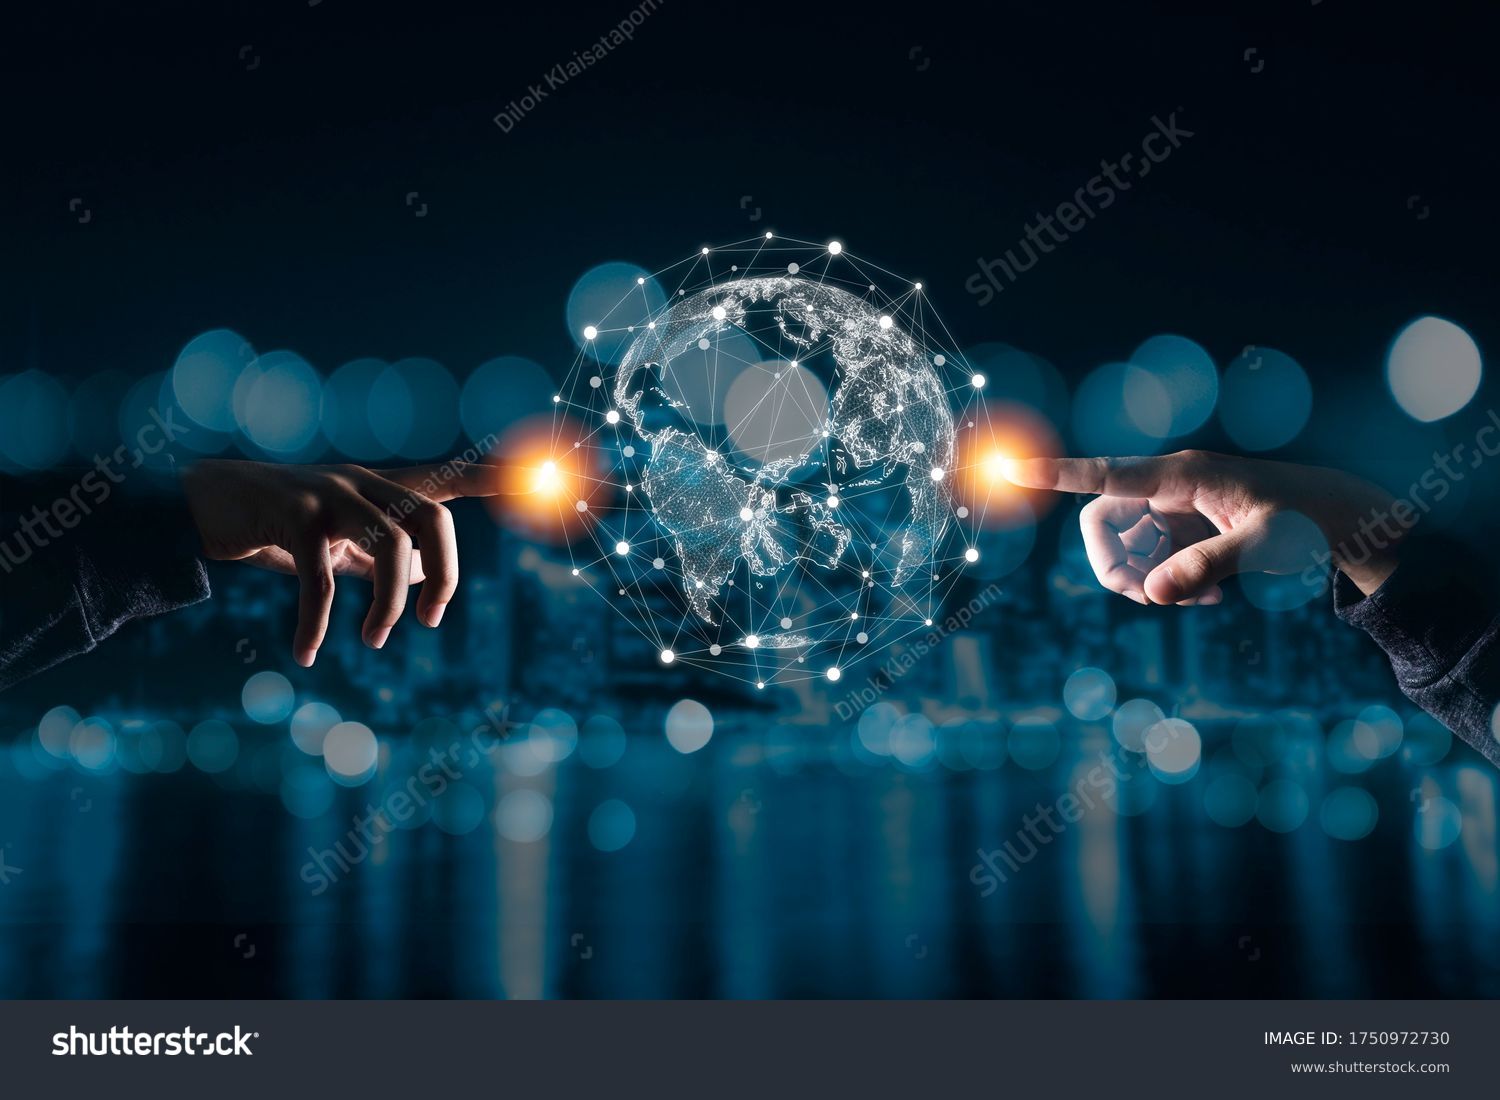 Hand touching virtual world with connection network. Global data information and technology exchange. #1750972730